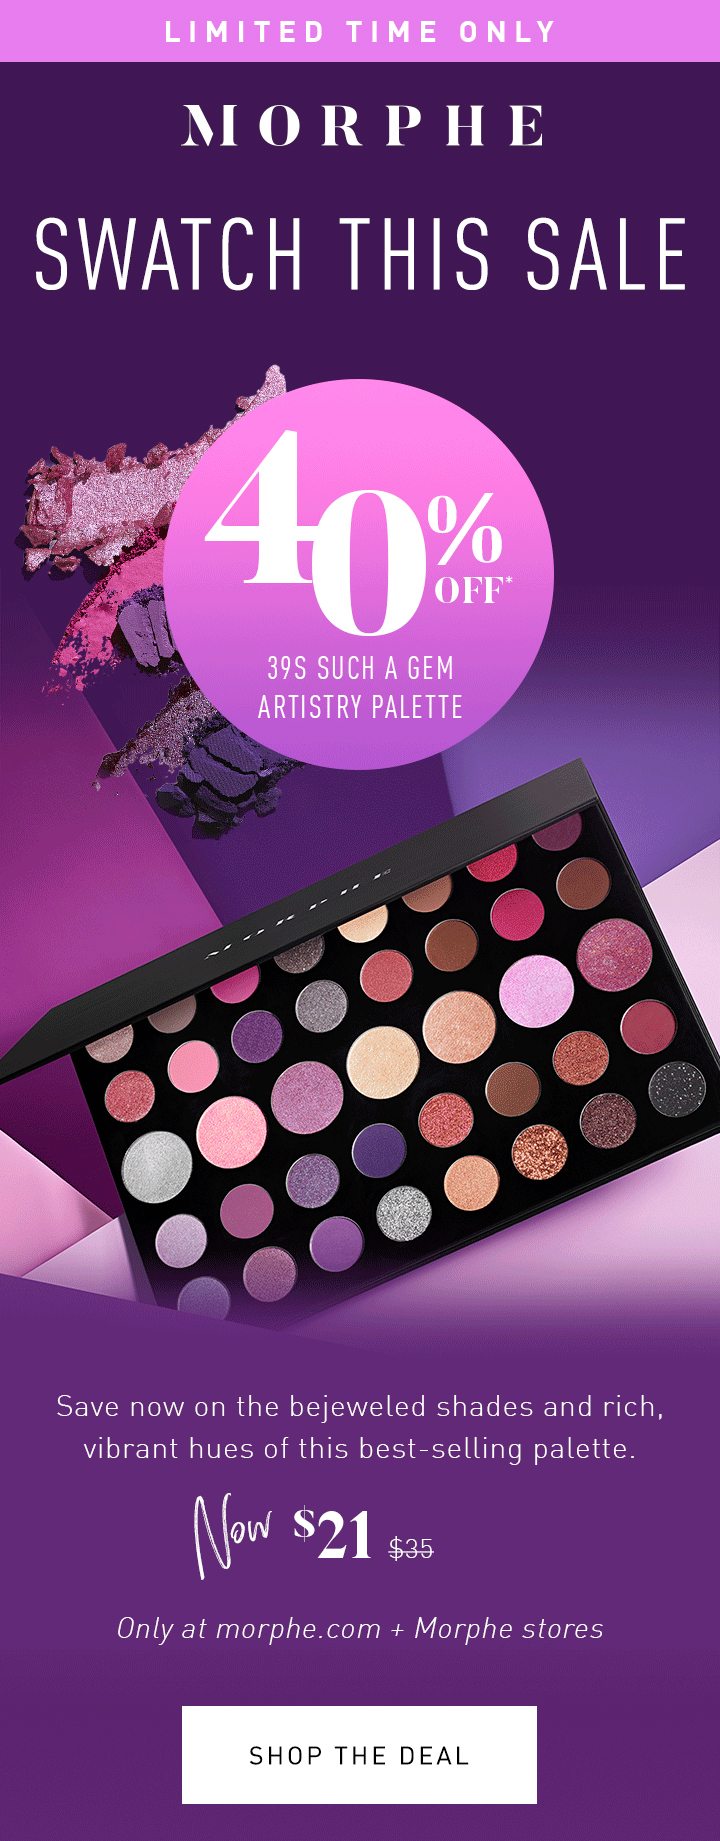 MORPHE LIMITED TIME ONLY SWATCH THIS SALE 40% OFF* 39S SUCH A GEM ARTISTRY PALETTE Save now on the bejeweled shades and rich, vibrant hues of this best-selling palette. NOW $21 $35 Only at morphe.com + Morphe stores SHOP THE DEAL 